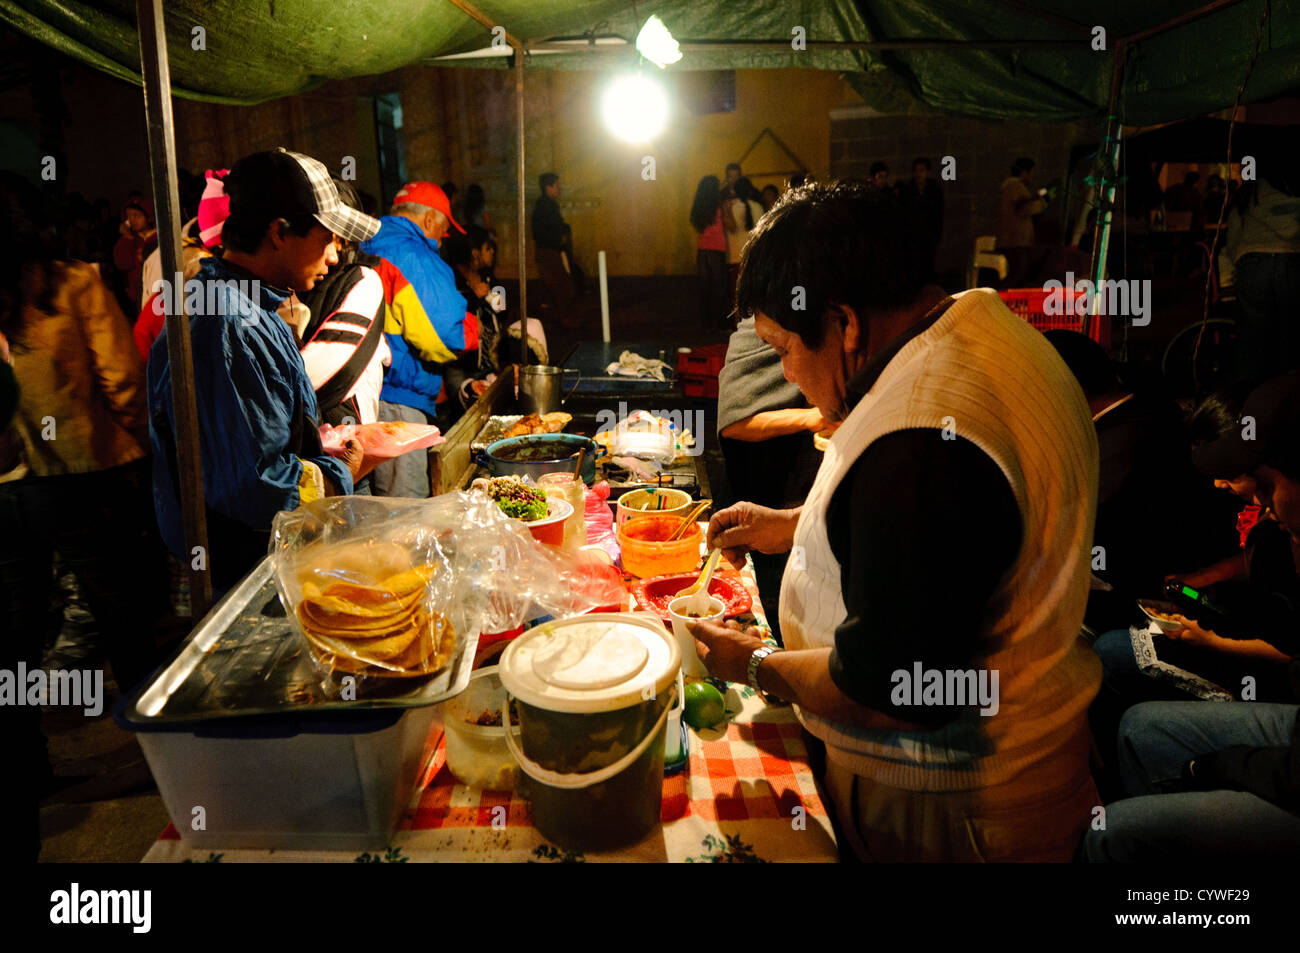 ANTIGUA, Guatemala - Dinner at a street food vendor as part of a night market set up for the holiday of Our Lady of Guadalupe Day in Antigua, Guatemala. Stock Photo